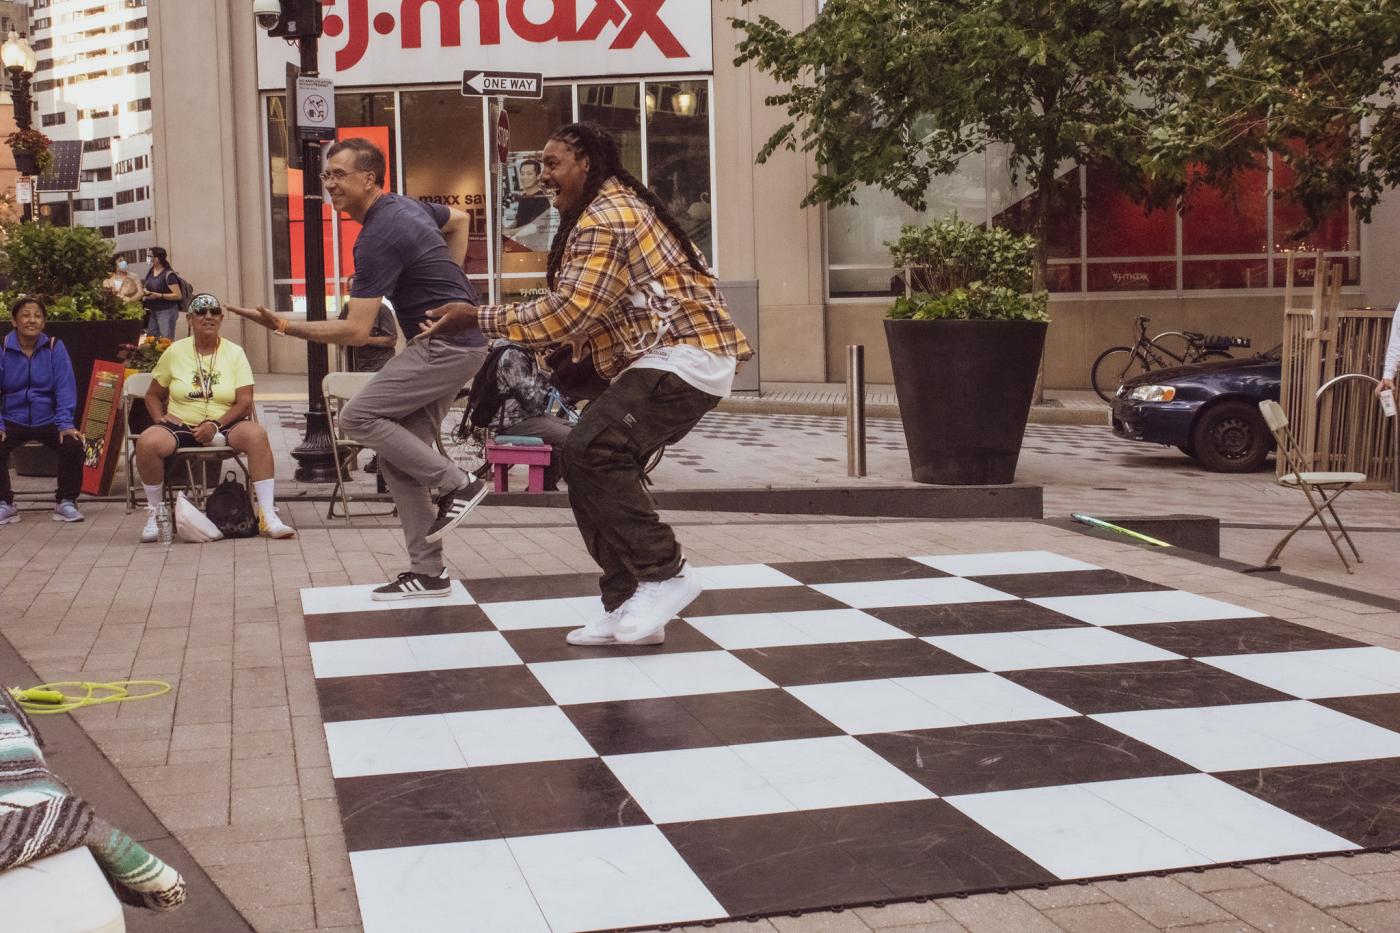 A light-skinned man and a dark-skinned person dance together on top of a checkerboard ground.